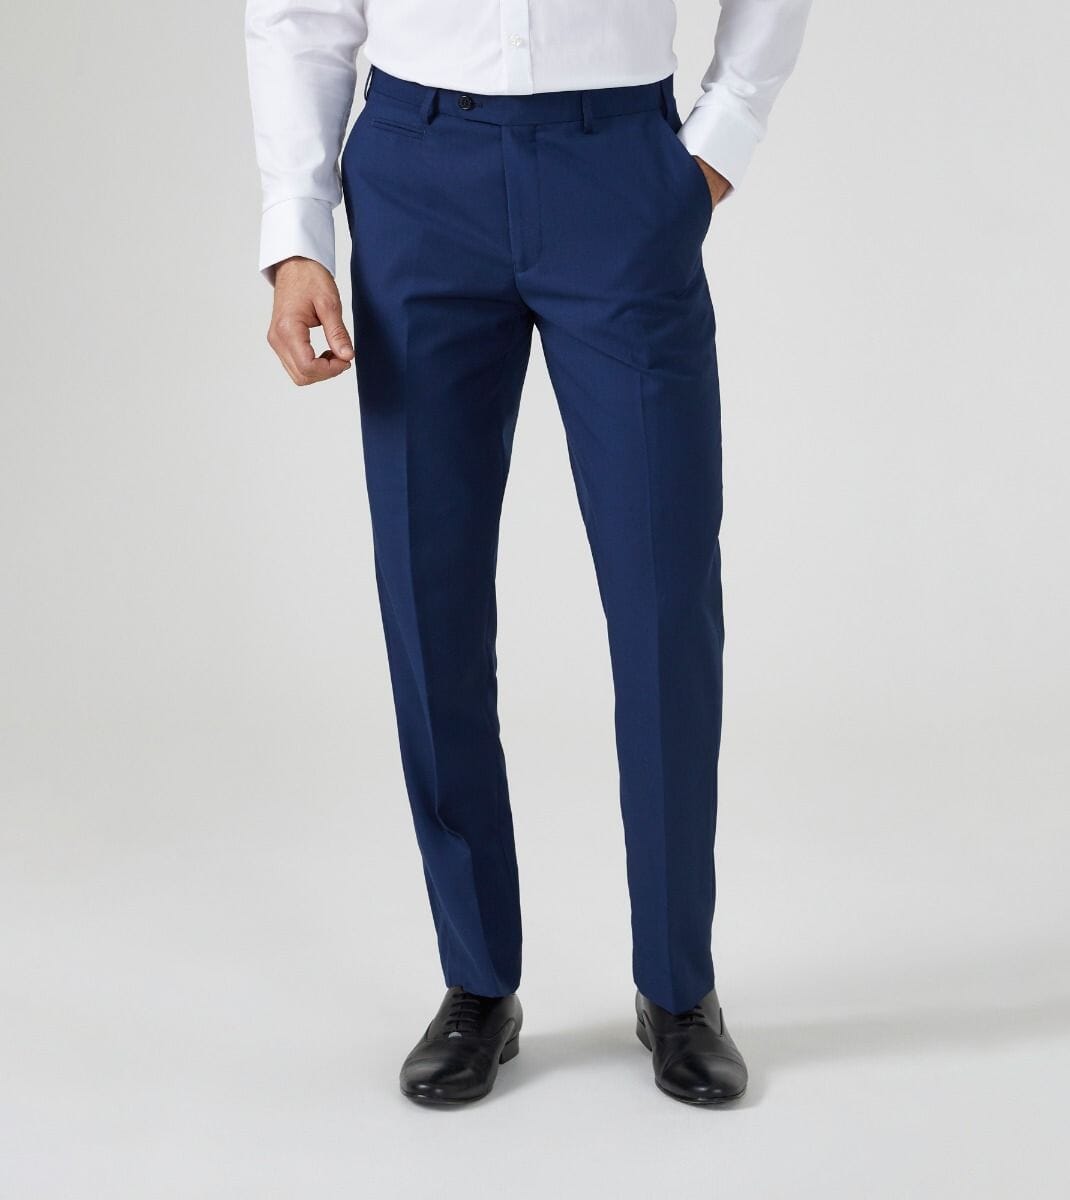 Kennedy Royal Blue Trousers - DUE 26/8/23 - Trousers - 28R - THREADPEPPER